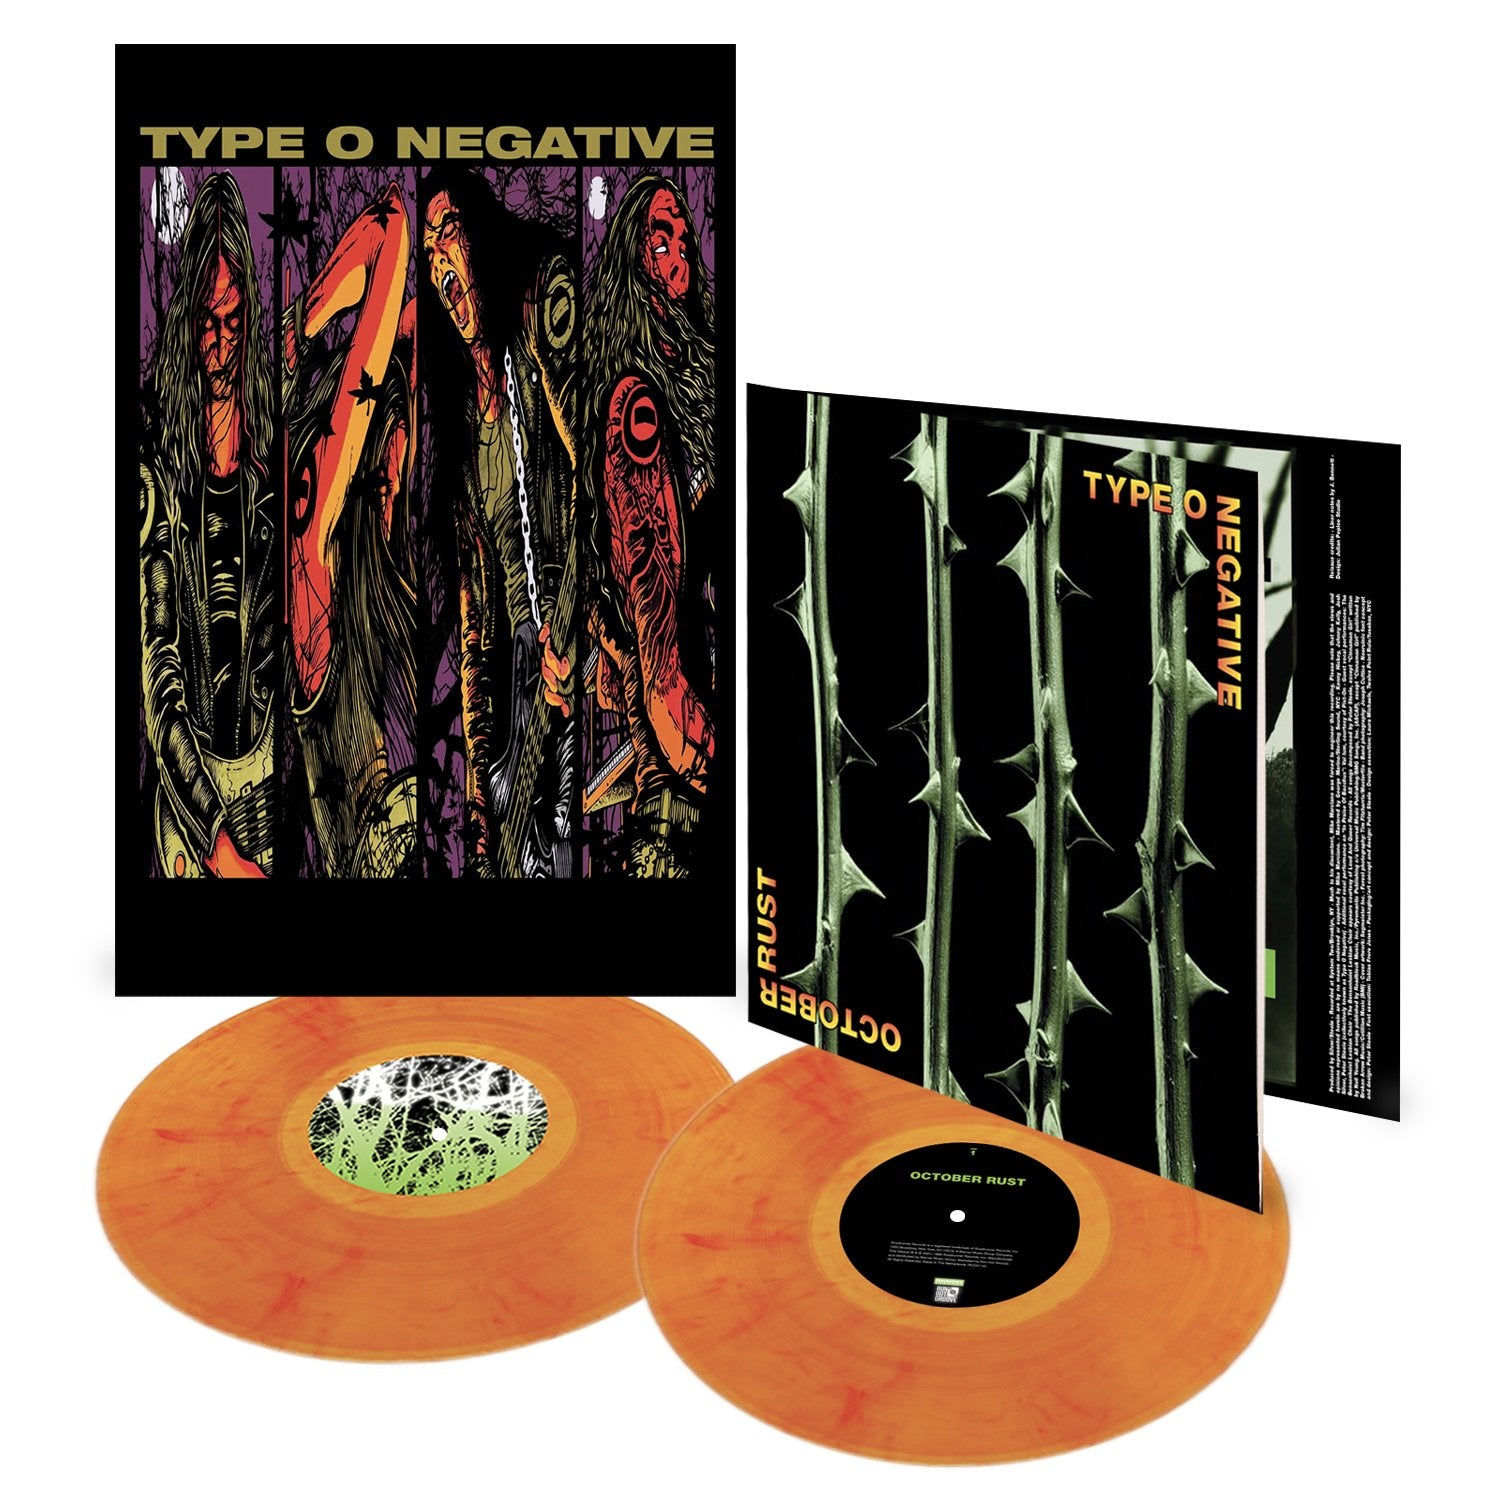 TYPE O NEGATIVE 'OCTOBER RUST' 2LP (Limited Edition – Only 1000 Made, Orange Mix Vinyl)